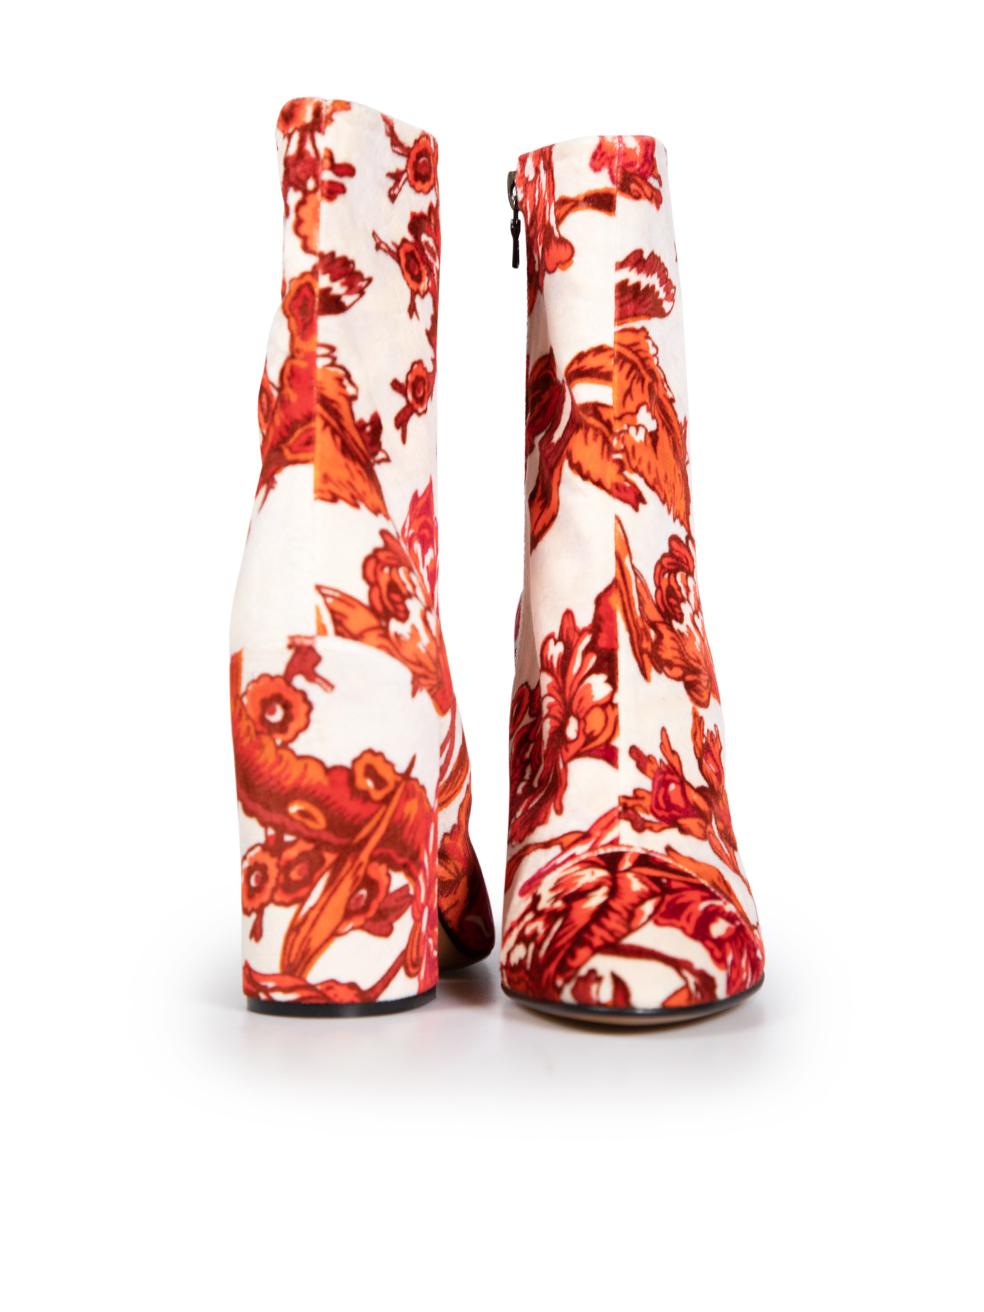 Dries Van Noten Floral Print Velvet Ankle Boots Size IT 37.5 In Good Condition For Sale In London, GB